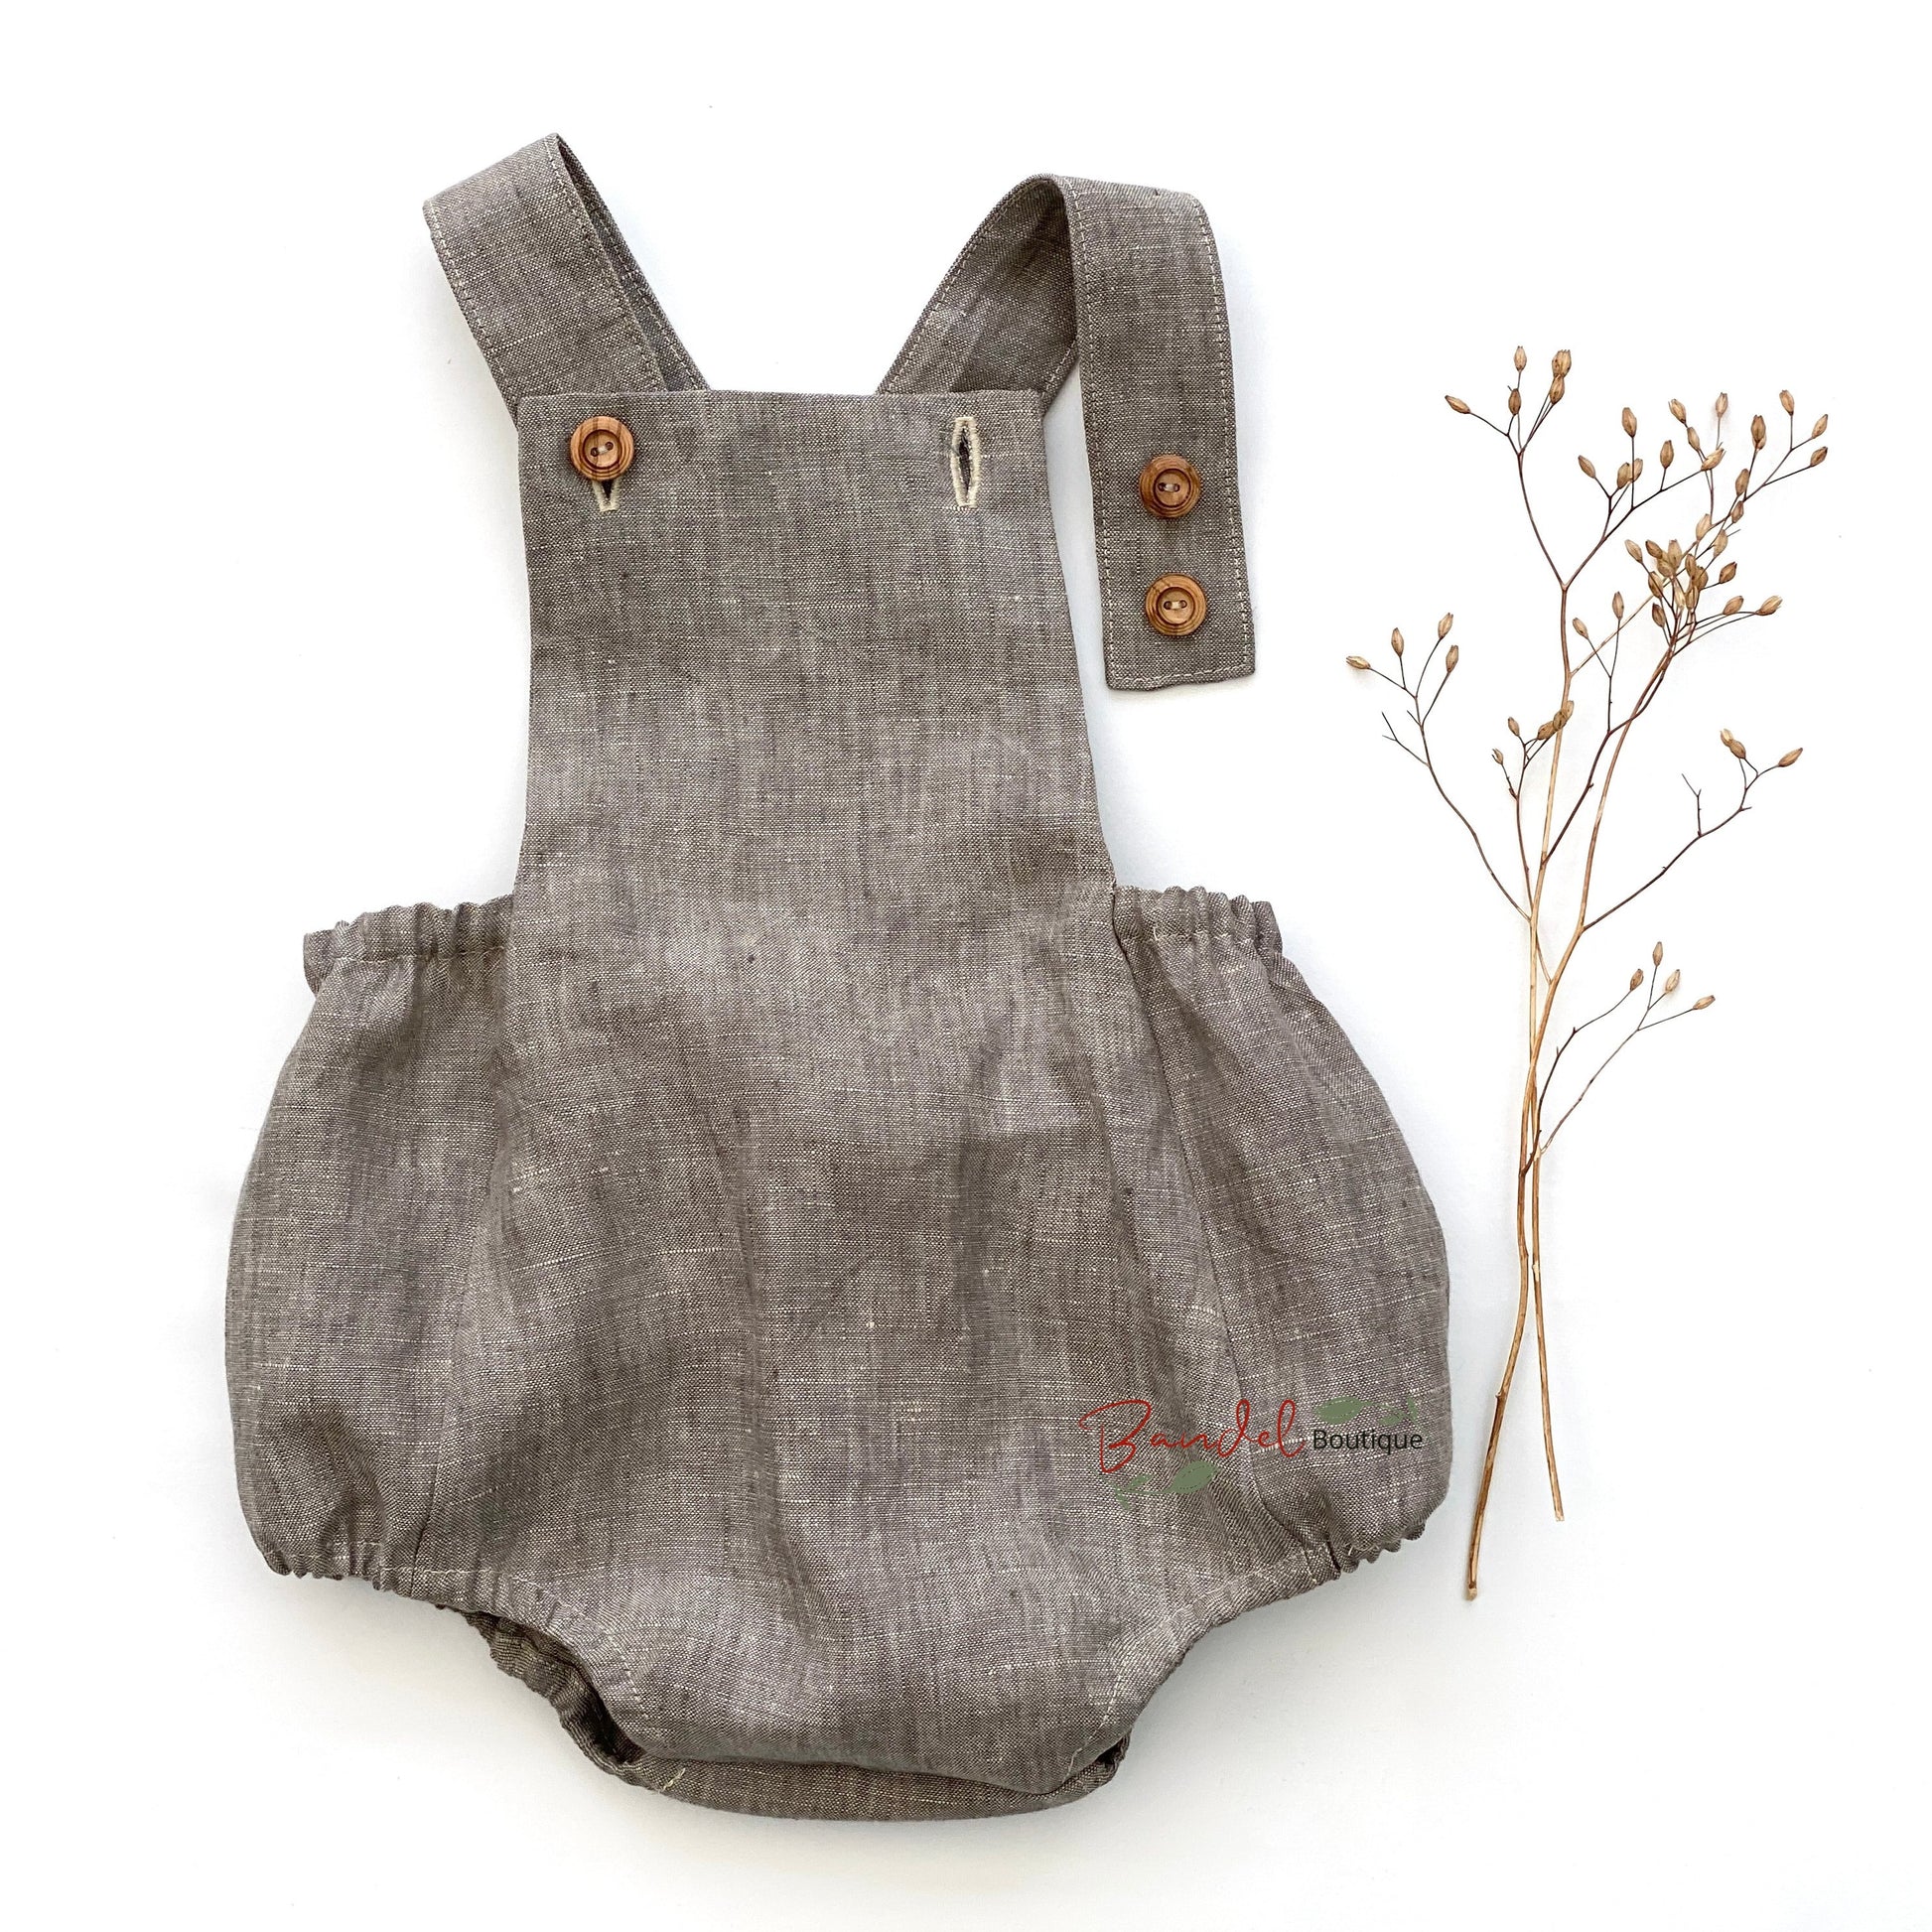 Vintage- Inspired Linen Baby Romper Features Two Straps With Wooden Button Front Closure Sage Green Newborn Outfit